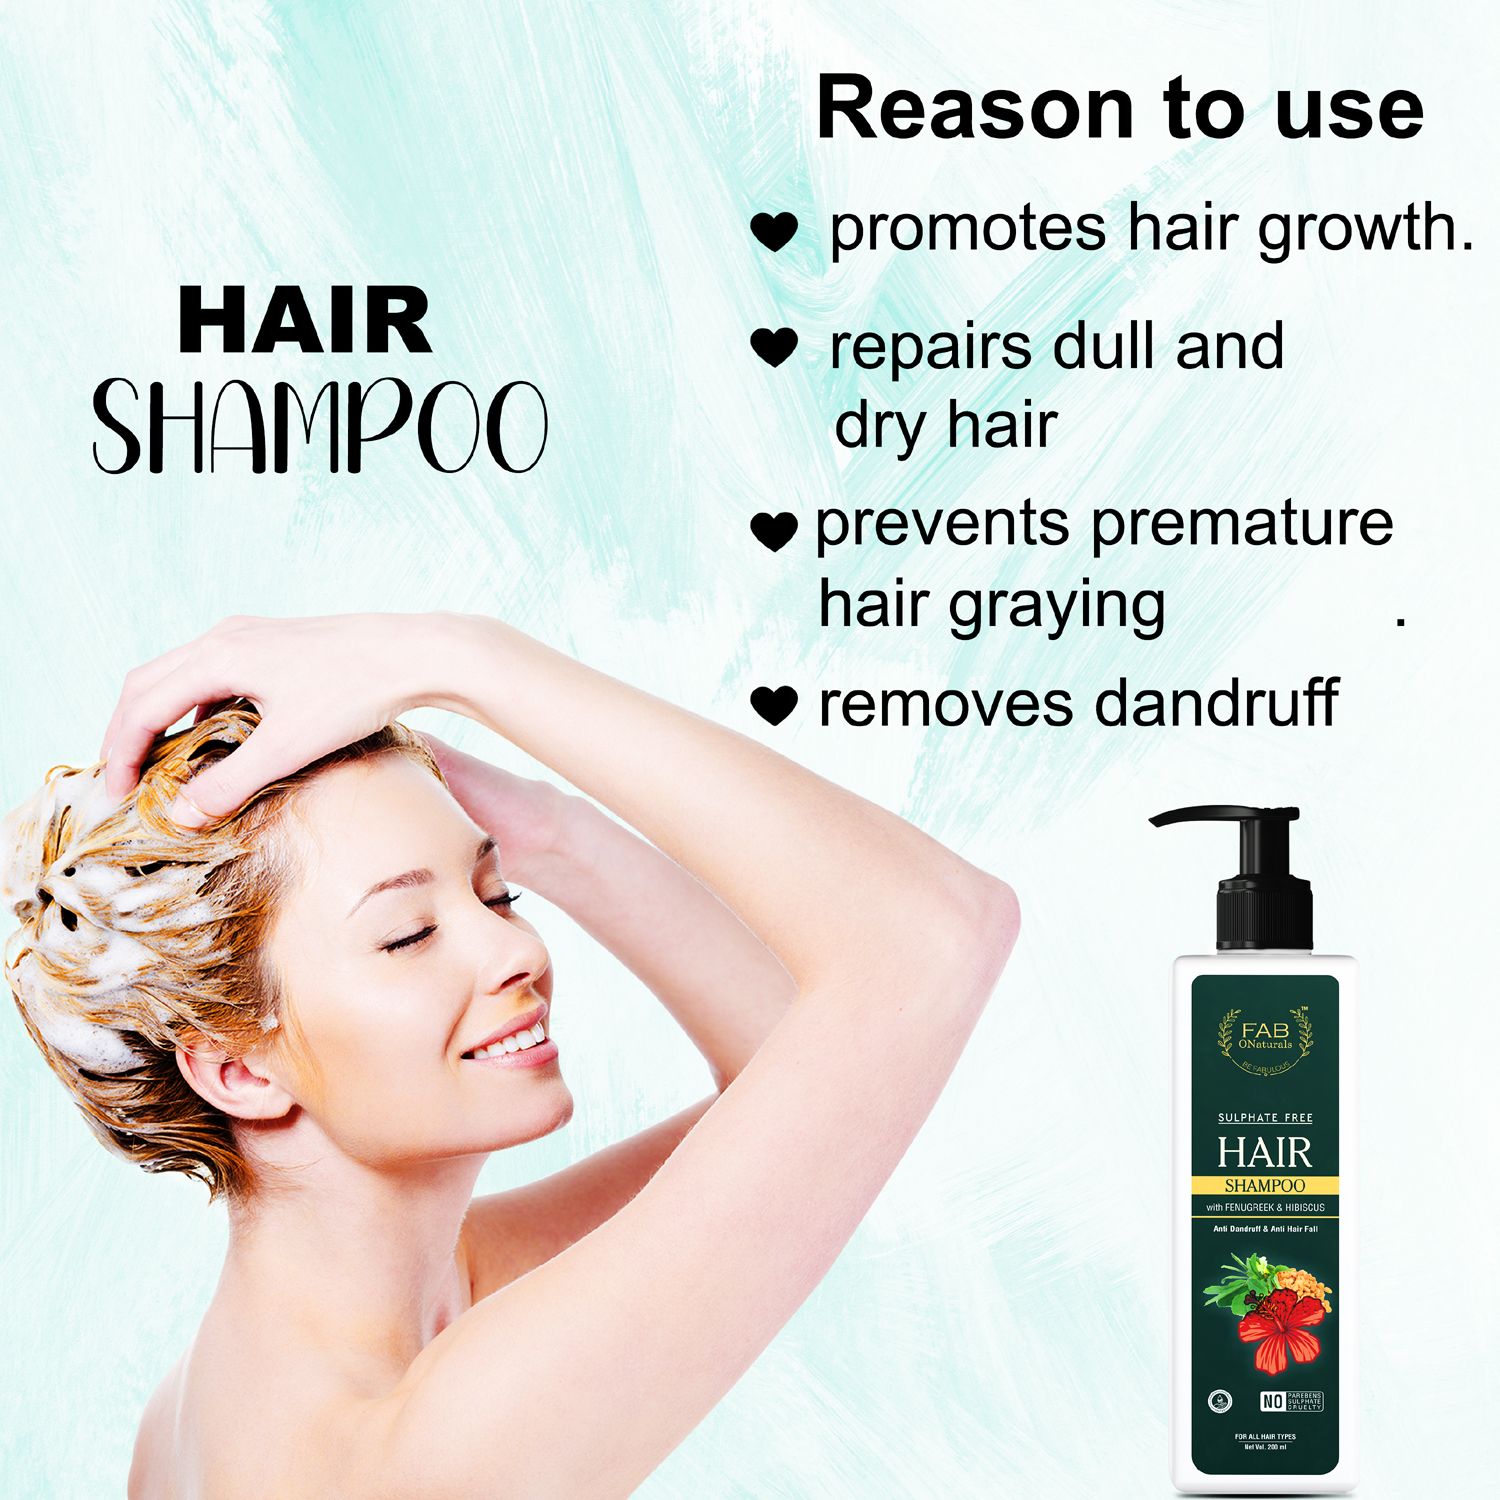 Fenugreek & Hibiscus Shampoo Natural Intense Repair & Sulphate free Shampoo for Frizzy and Dry Hair